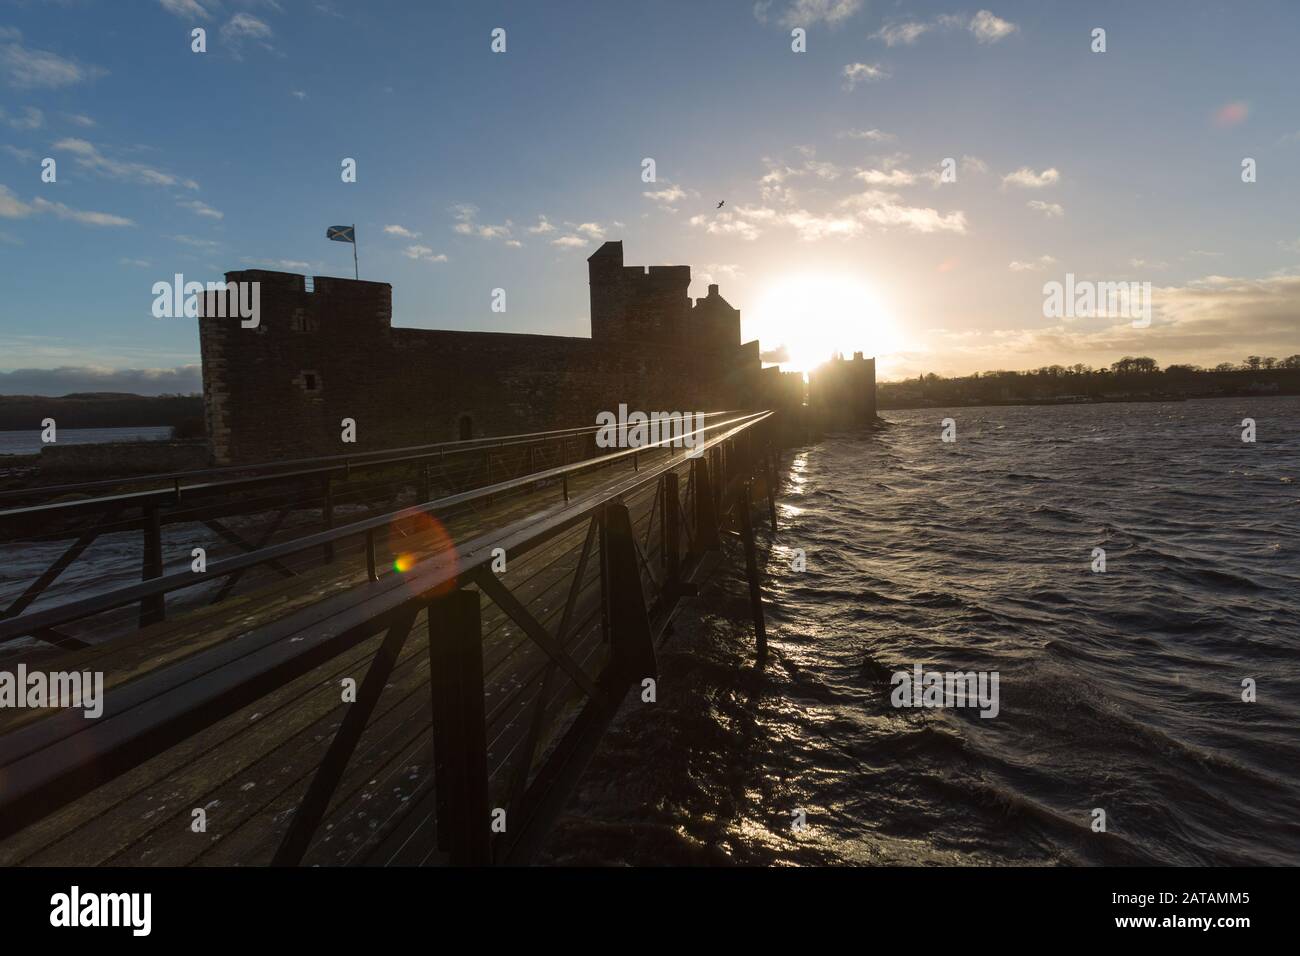 Blackness Castle, Blackness, Scotland. Silhouetted view of the western façade of Blackness Castle, with the 19th century pier in the foreground. Stock Photo